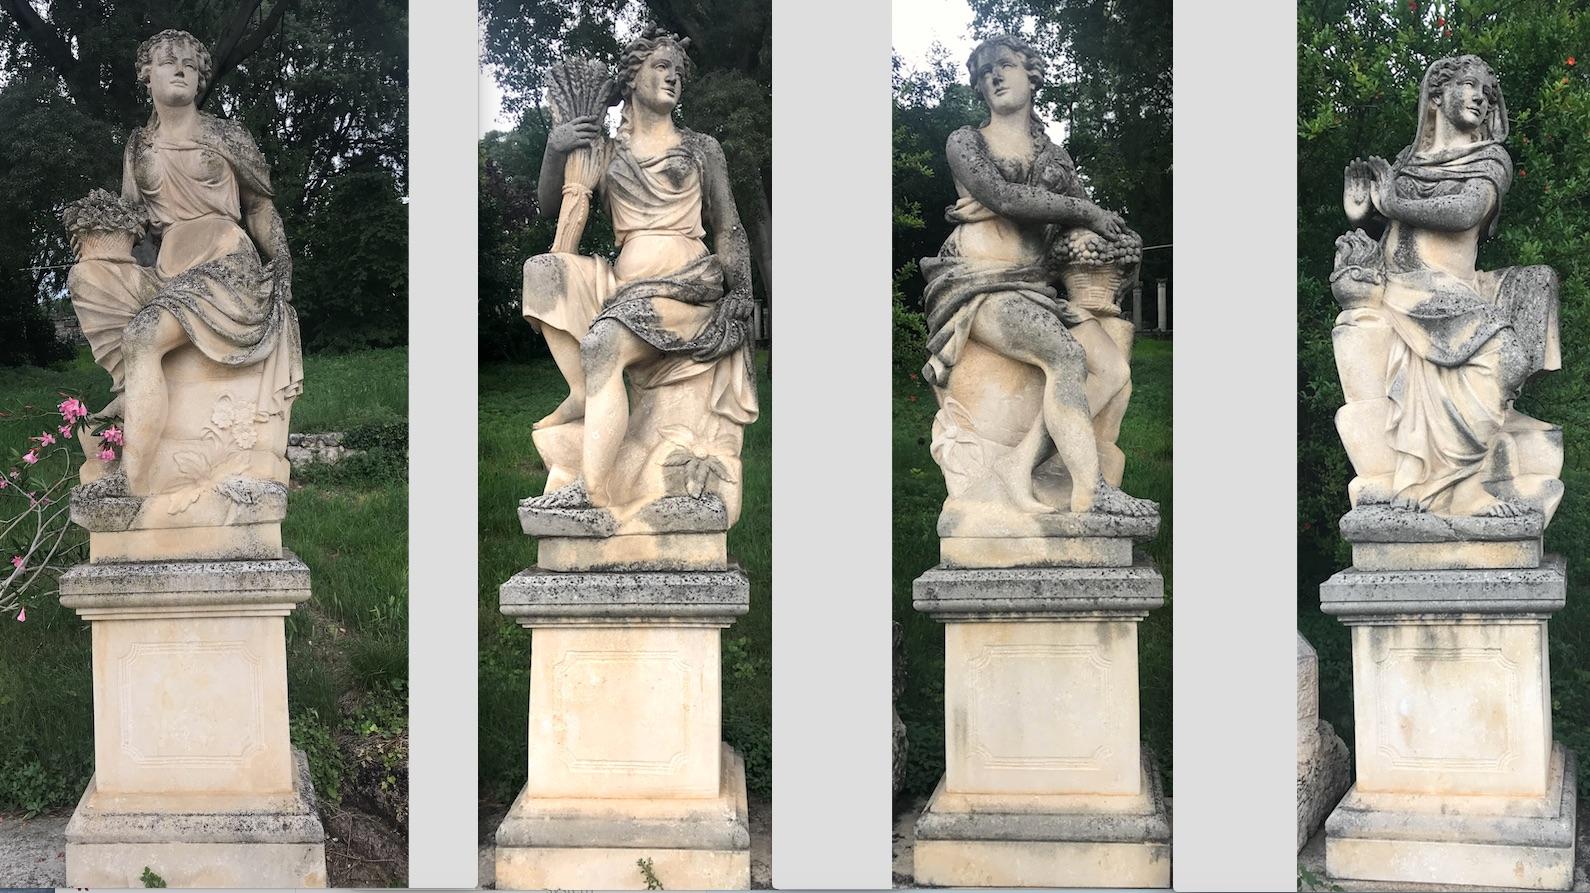 Unknown Figurative Sculpture - Set of Extraordinary Italian Stone Statues Representing the Four Seasons